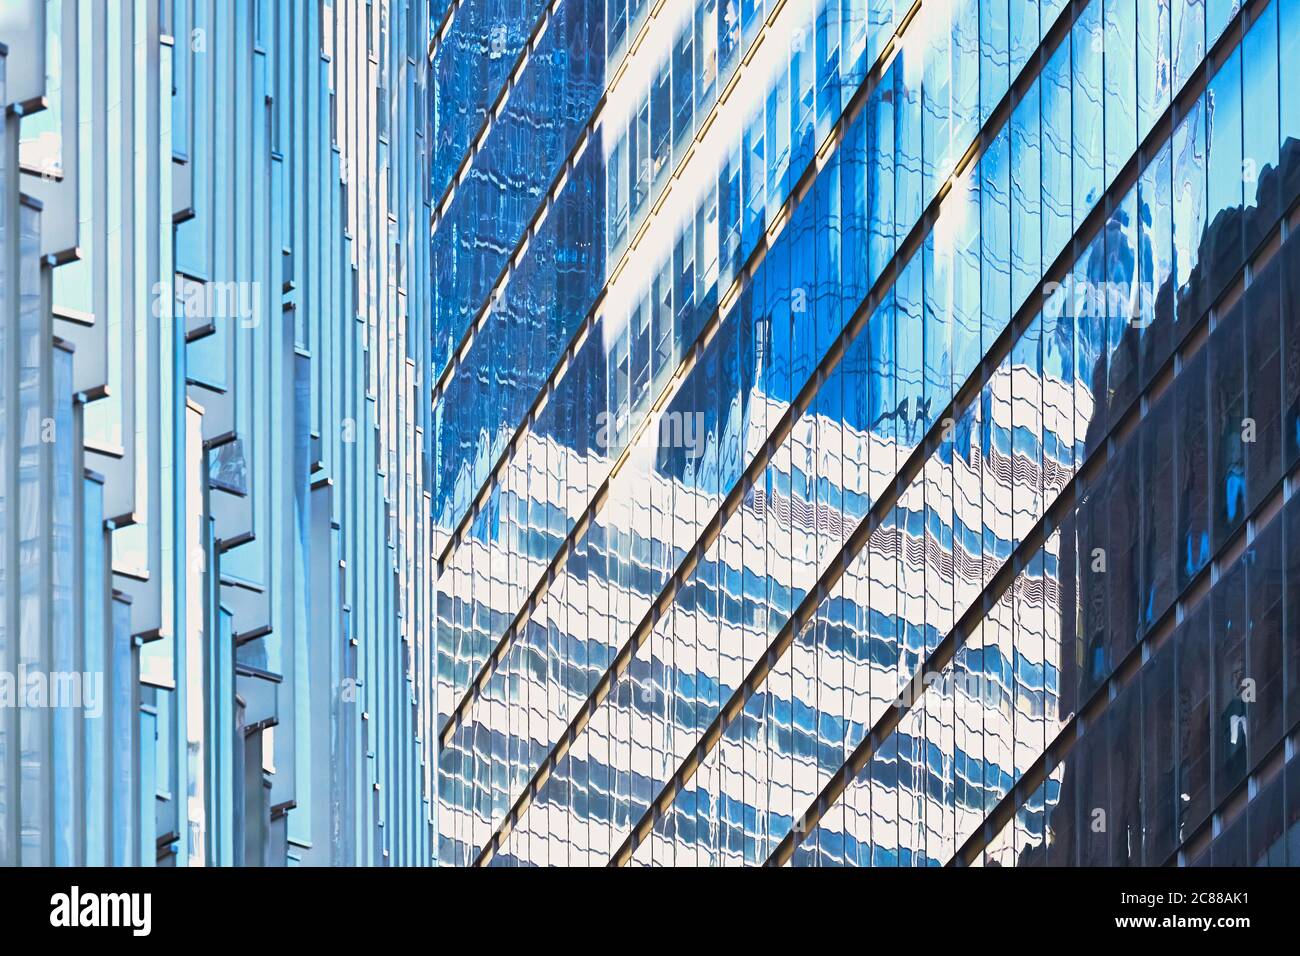 Modern buildings facades abstract architecture background. Stock Photo